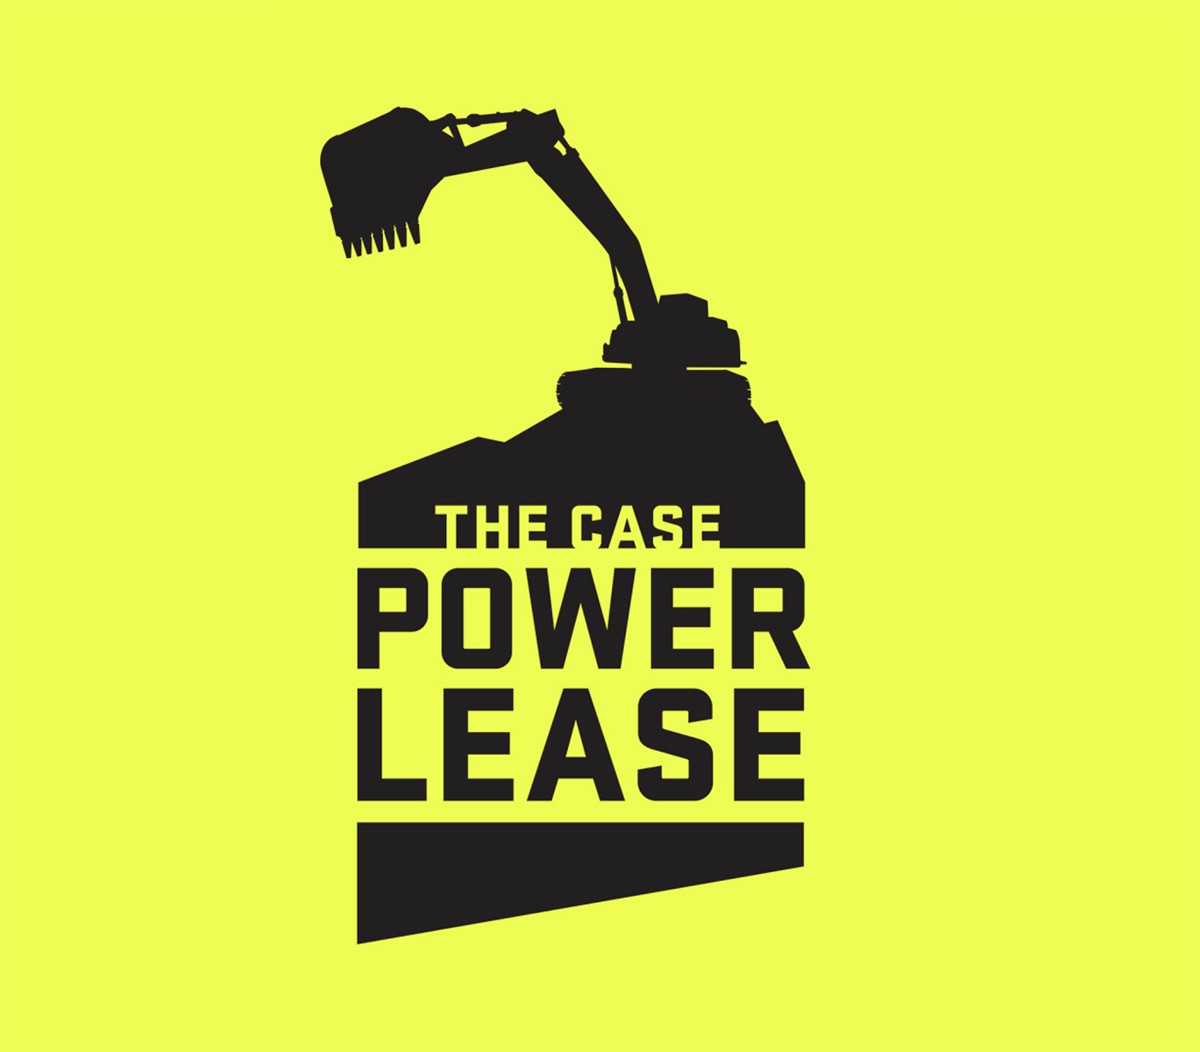 CASE offers first-of-its-kind Lease Program for Heavy Excavators